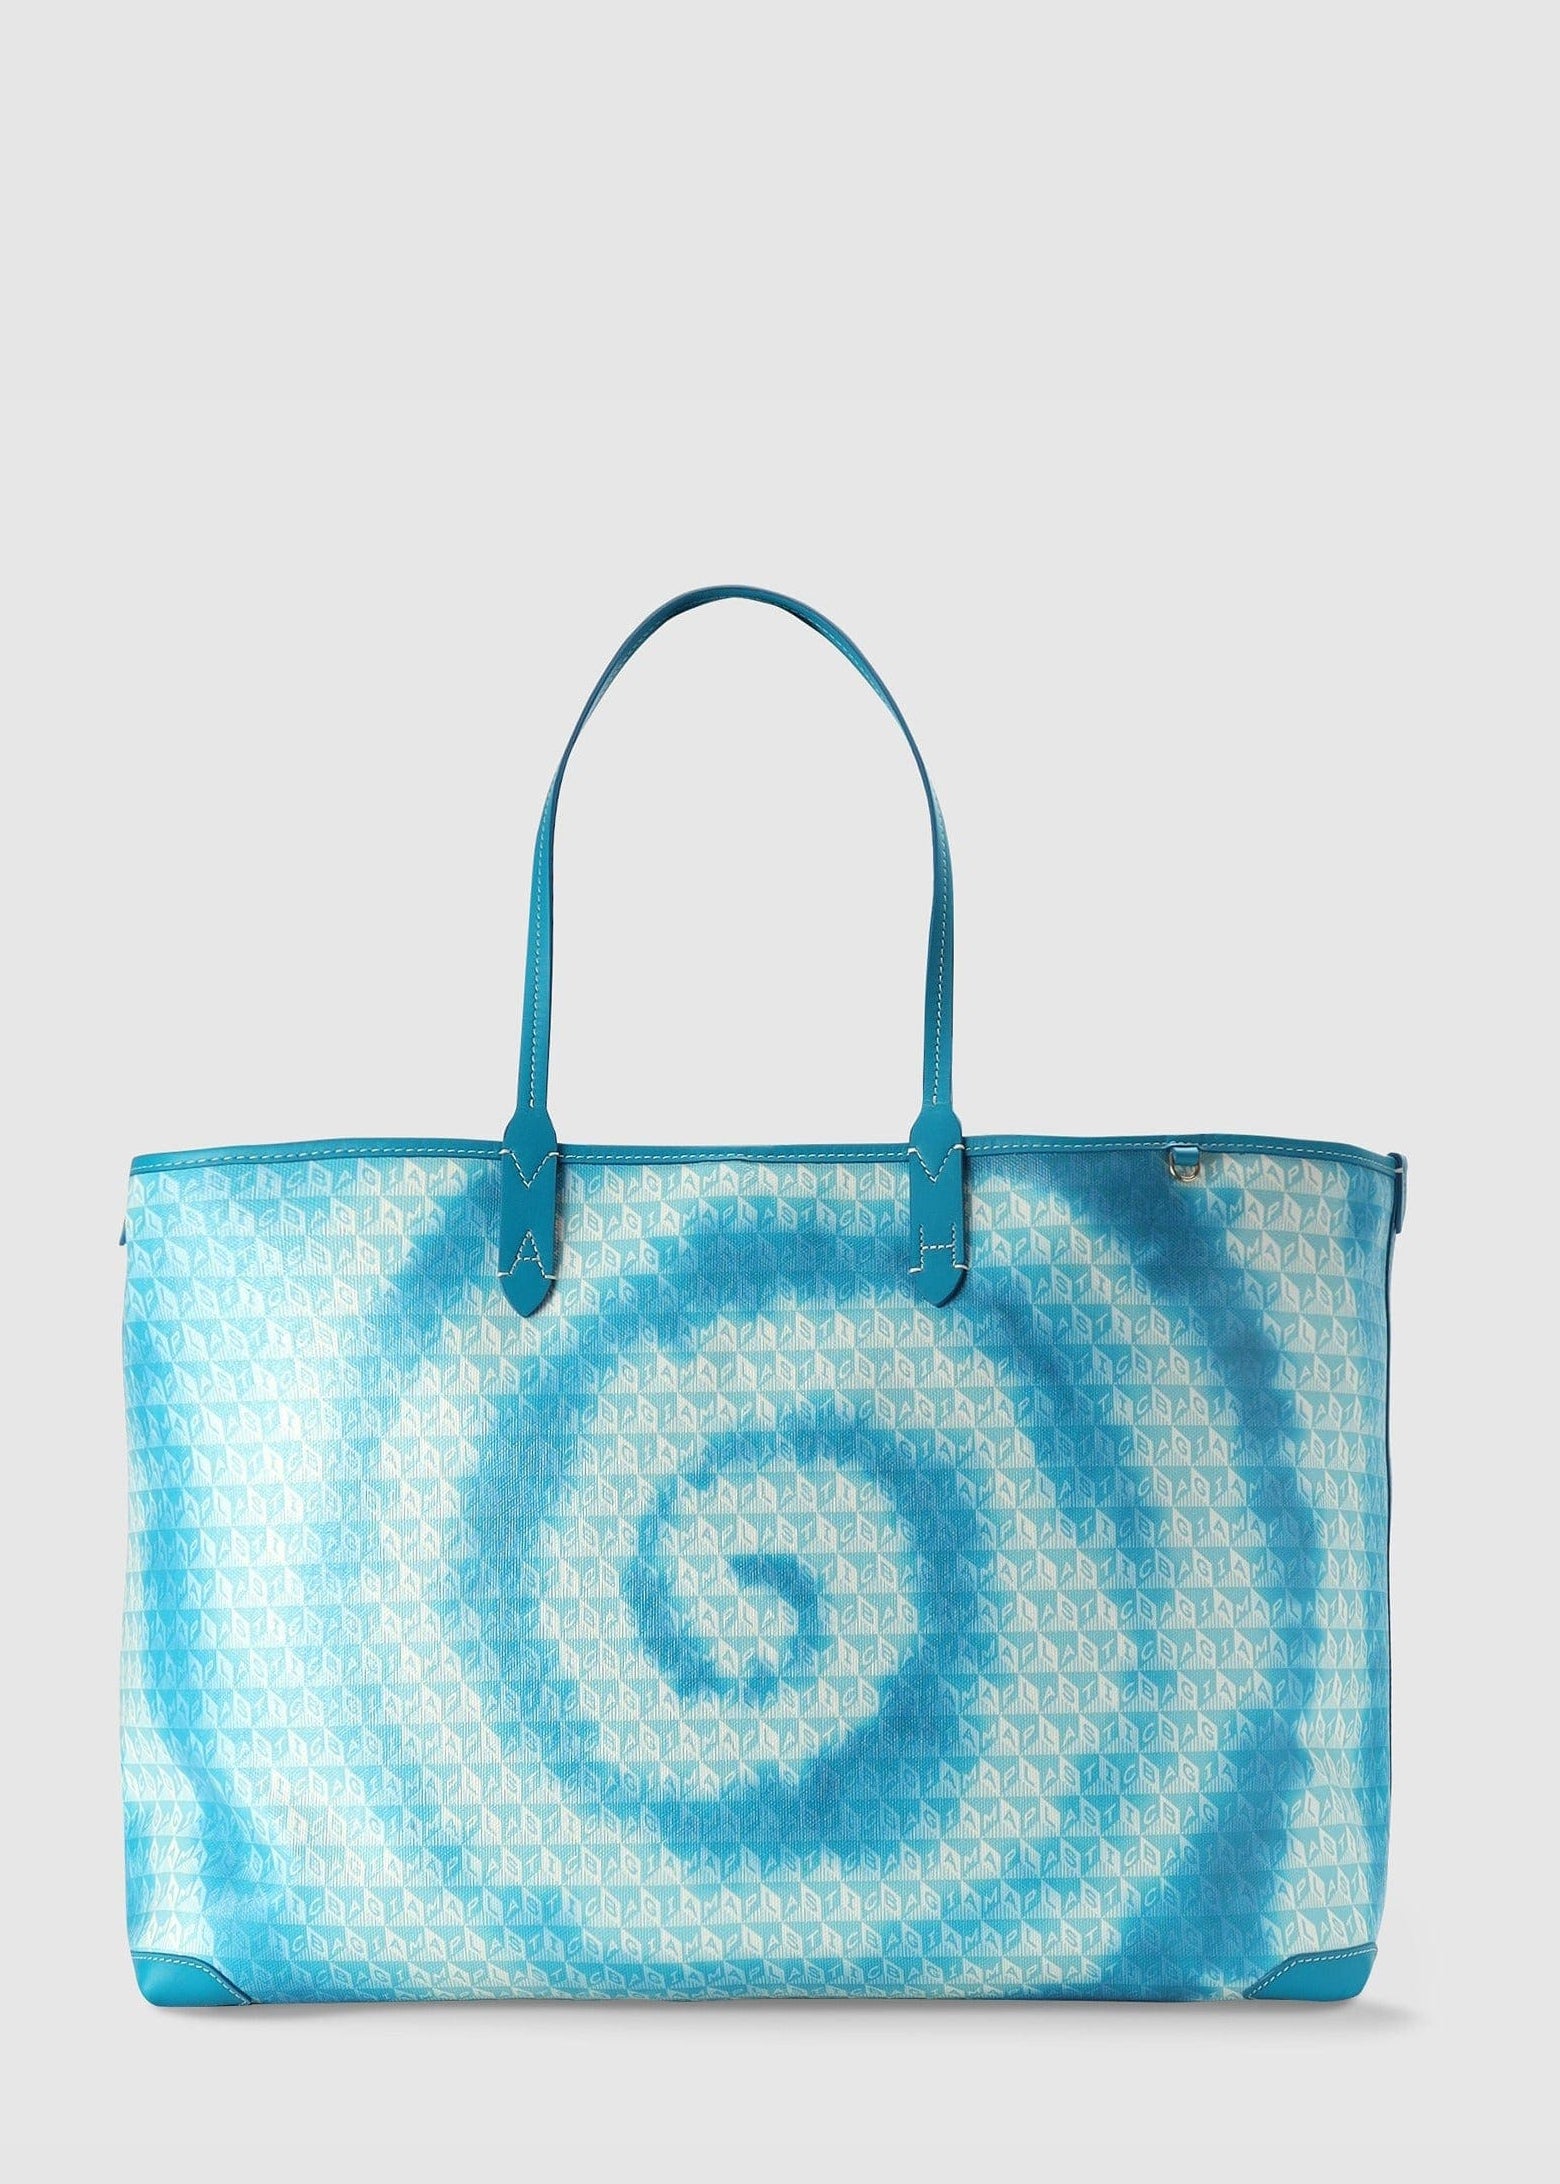 Image of Anya Hindmarch Women's I Am A Plastic Bag Tie Dye Blue Tote Bag